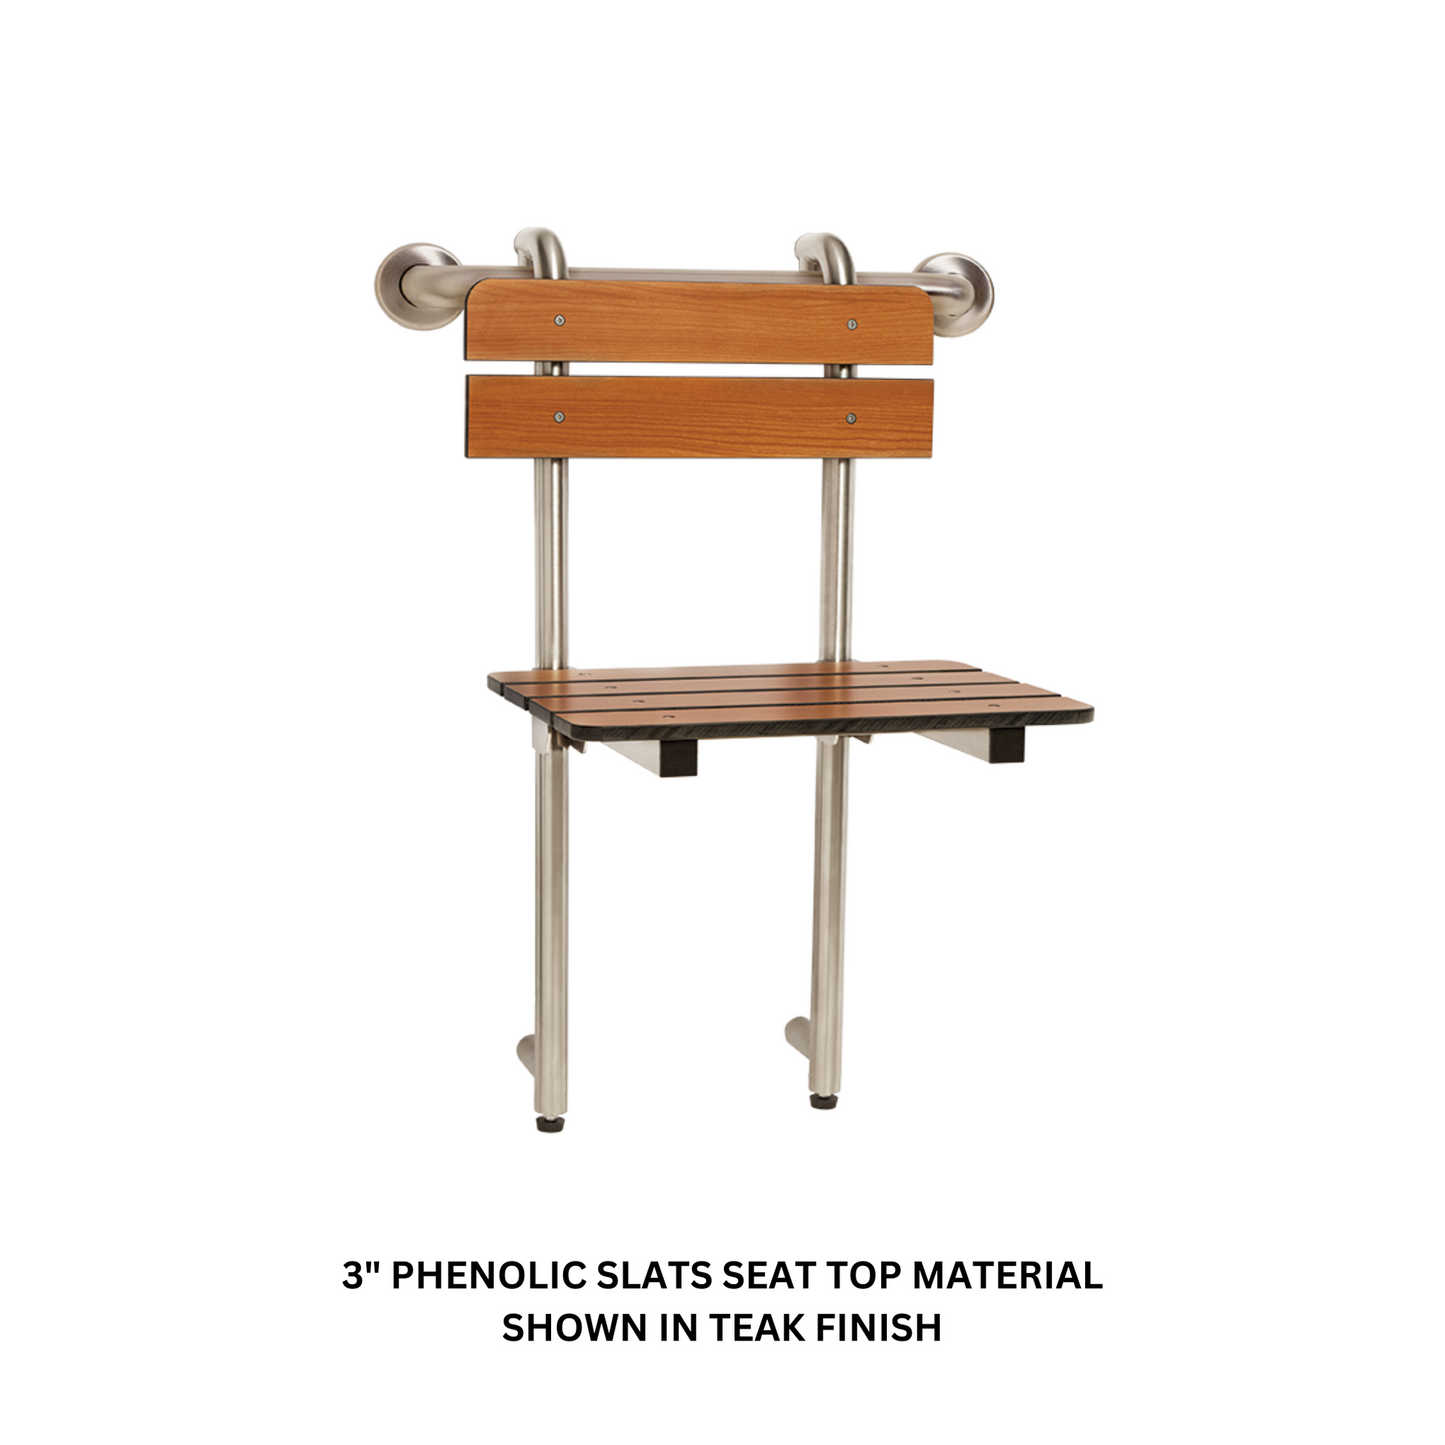 Seachrome Signature Lifestyle & Wellness Series 18" Almond 3" Phenolic Slats Profile Bench Seat and Grab Bar Hung With Backrest and Legs